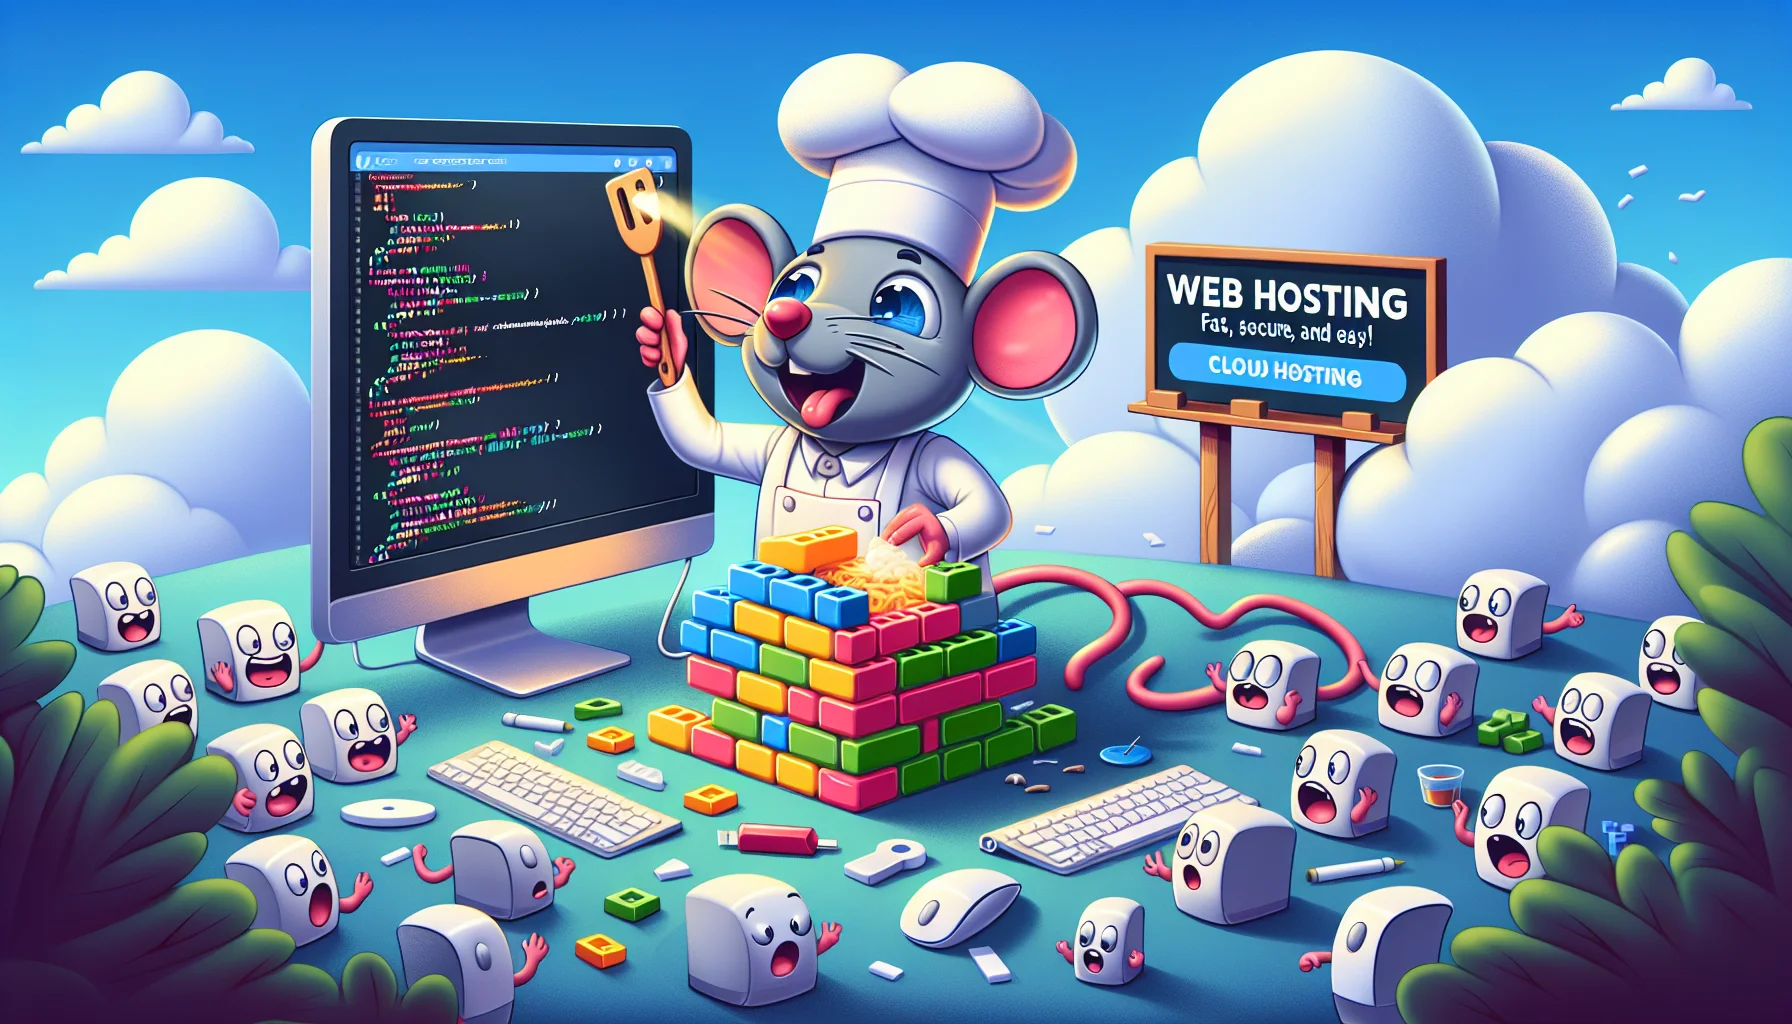 Create a comical and engaging image showcasing the concept of a top-tier restaurant website builder software. In the setting, let's have an anthropomorphic computer mouse with a chef's hat and apron, deftly constructing a digital restaurant with glowing code bricks. Around him, a crowd of other computer accessories like keyboards and flash drives, show surprised and admiring expressions. In the background, we can see a billboard advertising 'Web Hosting - Fast, Secure, and Easy!' support draped on a cloud, to signify the cloud hosting premise. This is all occurring in a whimsical, almost cartoonish digital landscape.